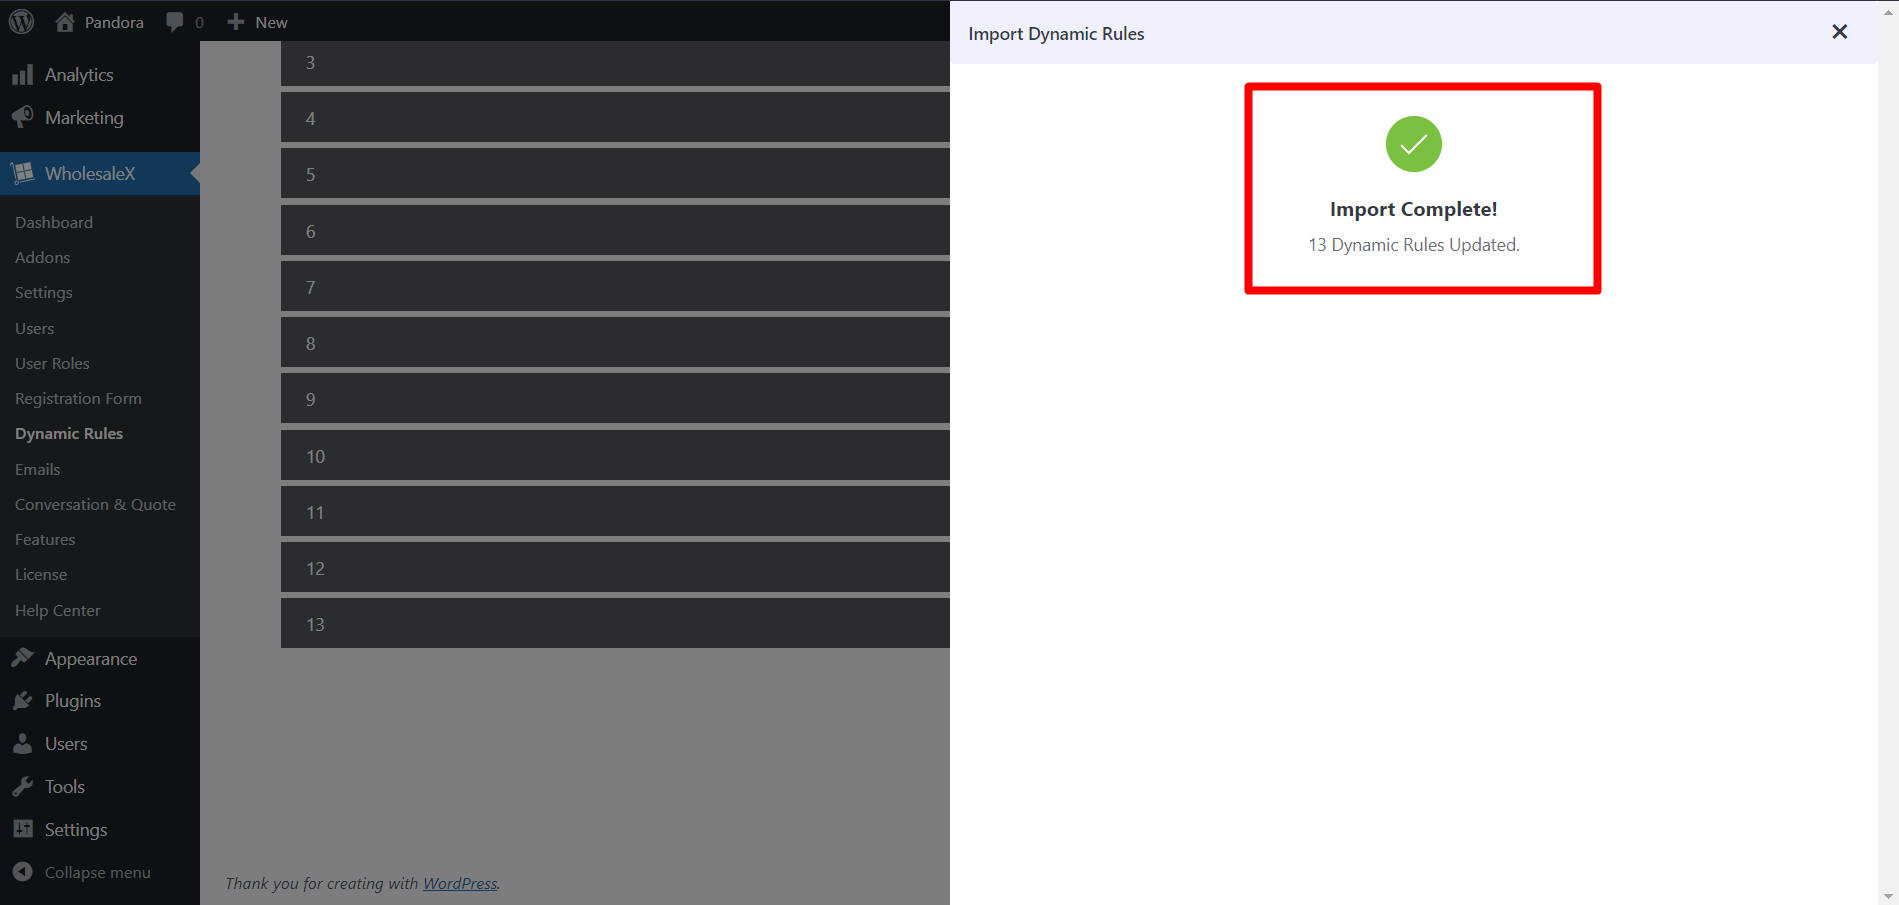 Dynamic Rules Successful Import Message